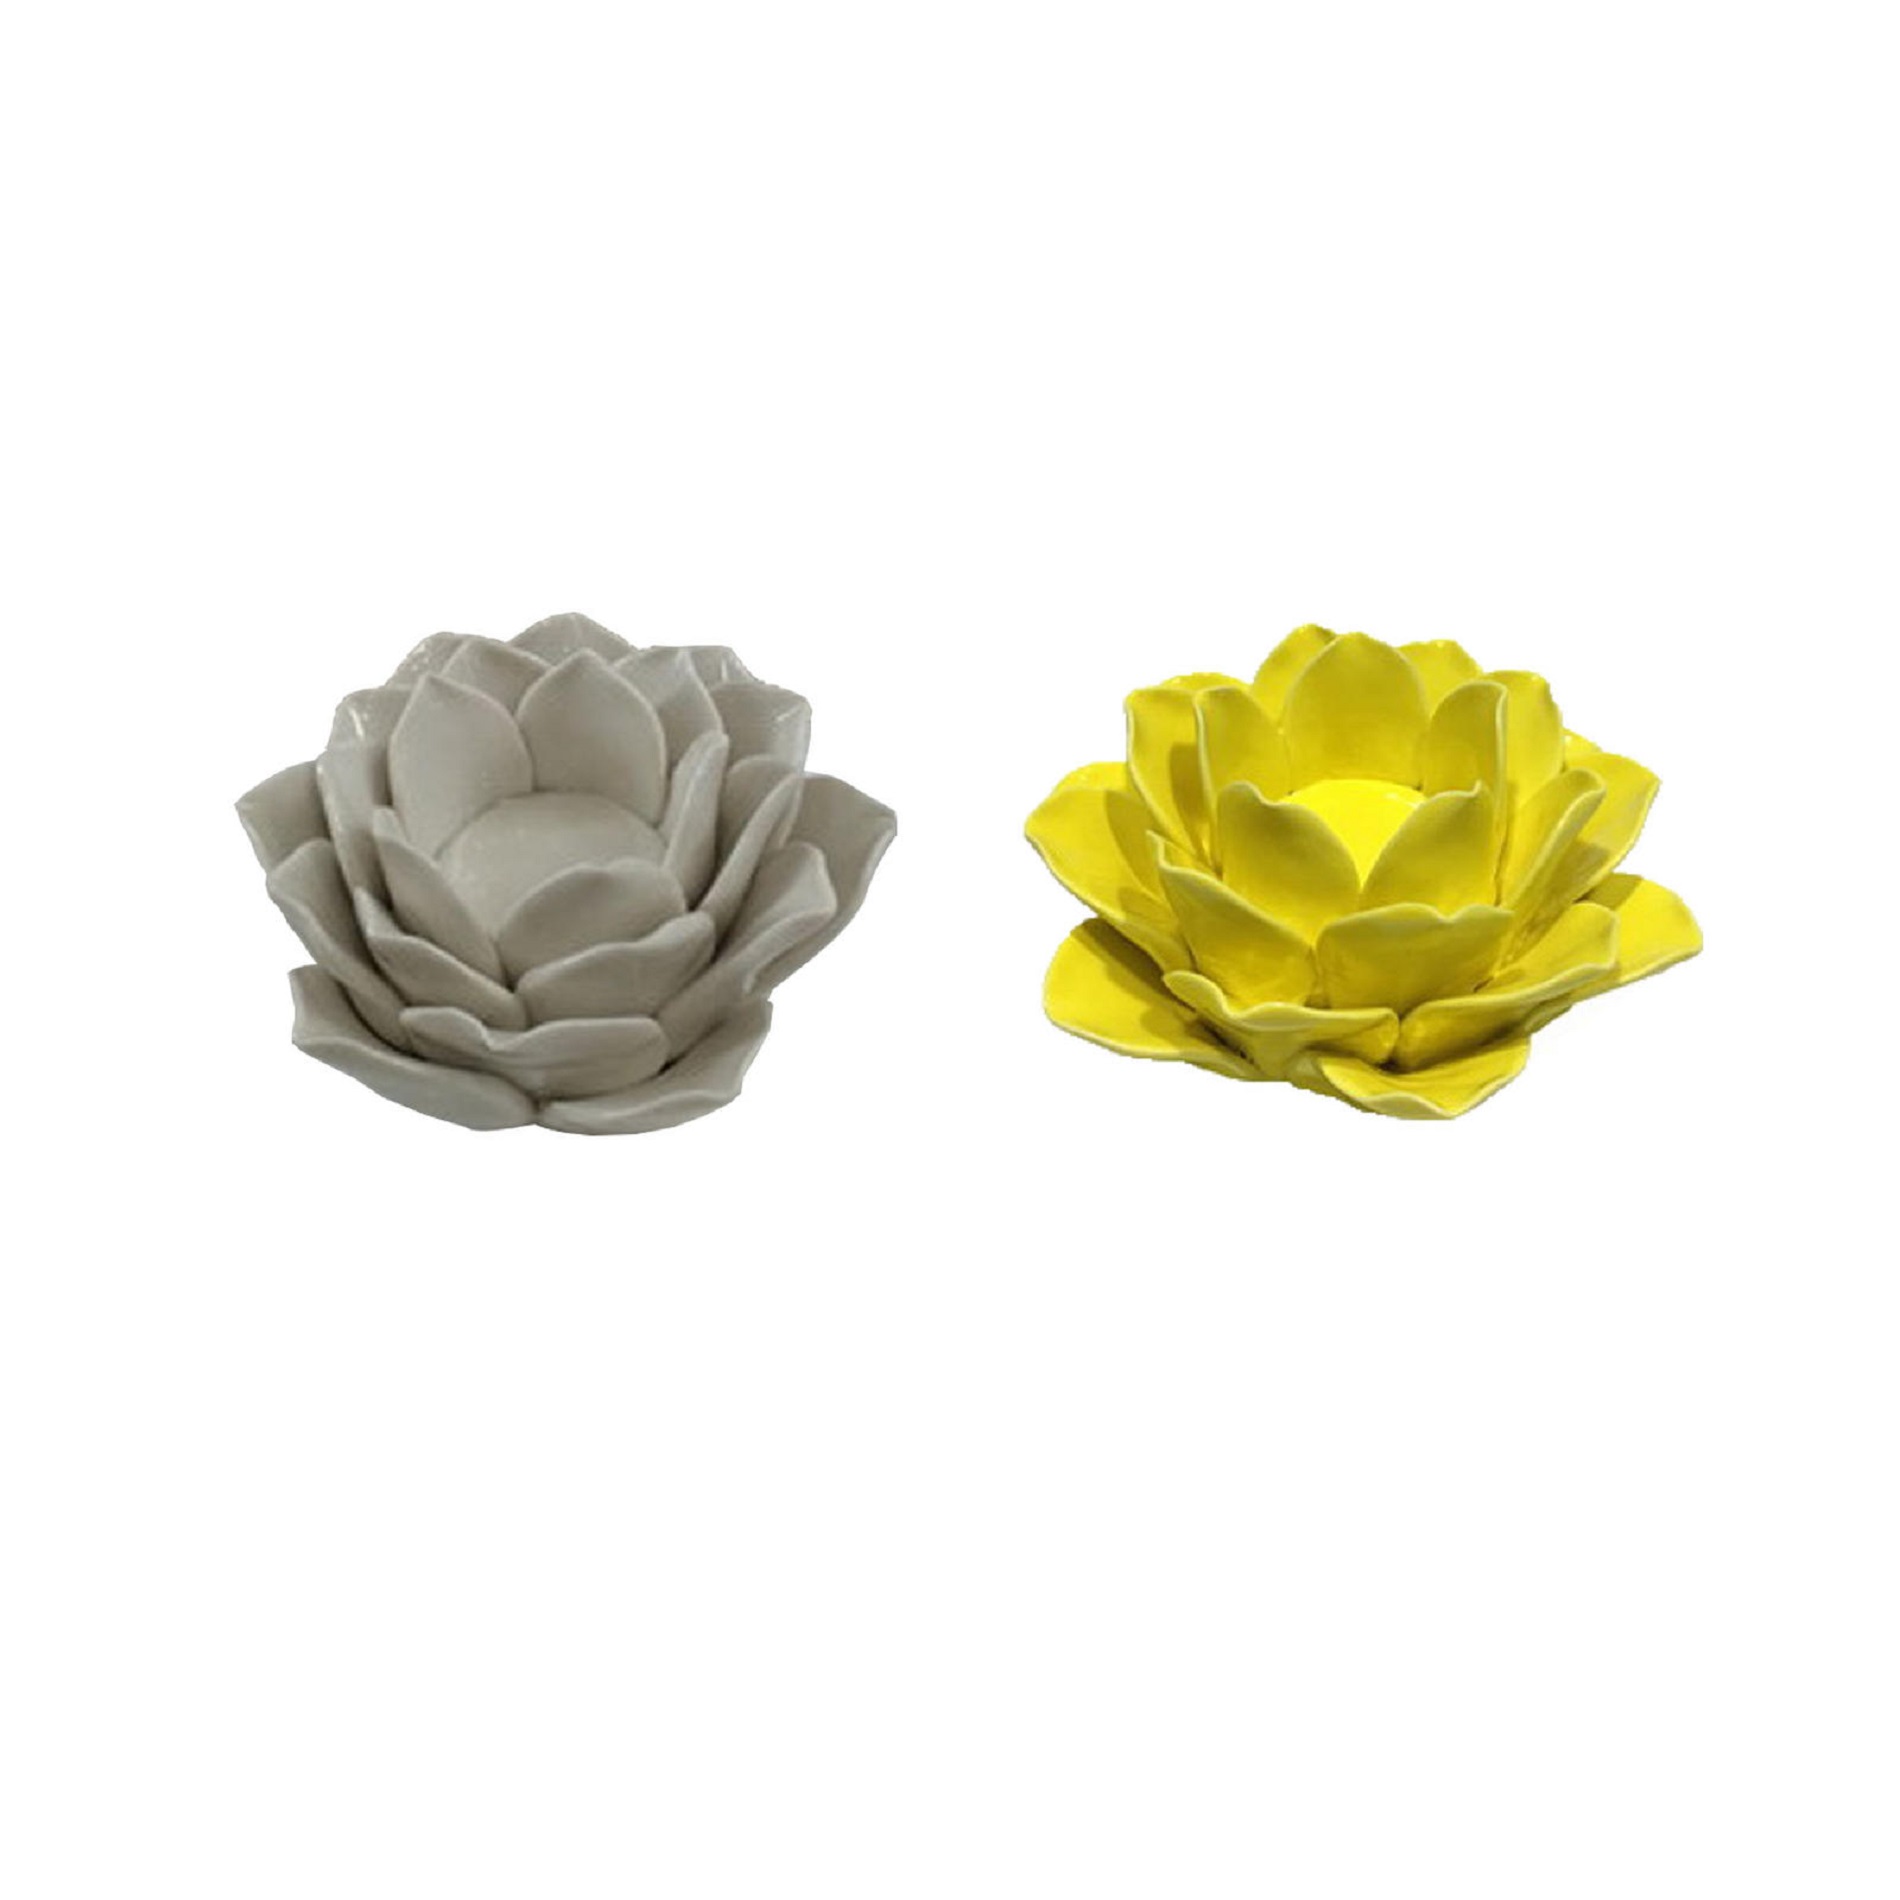 Sutton Rowe Ceramic Lotus - White *Limited Availability